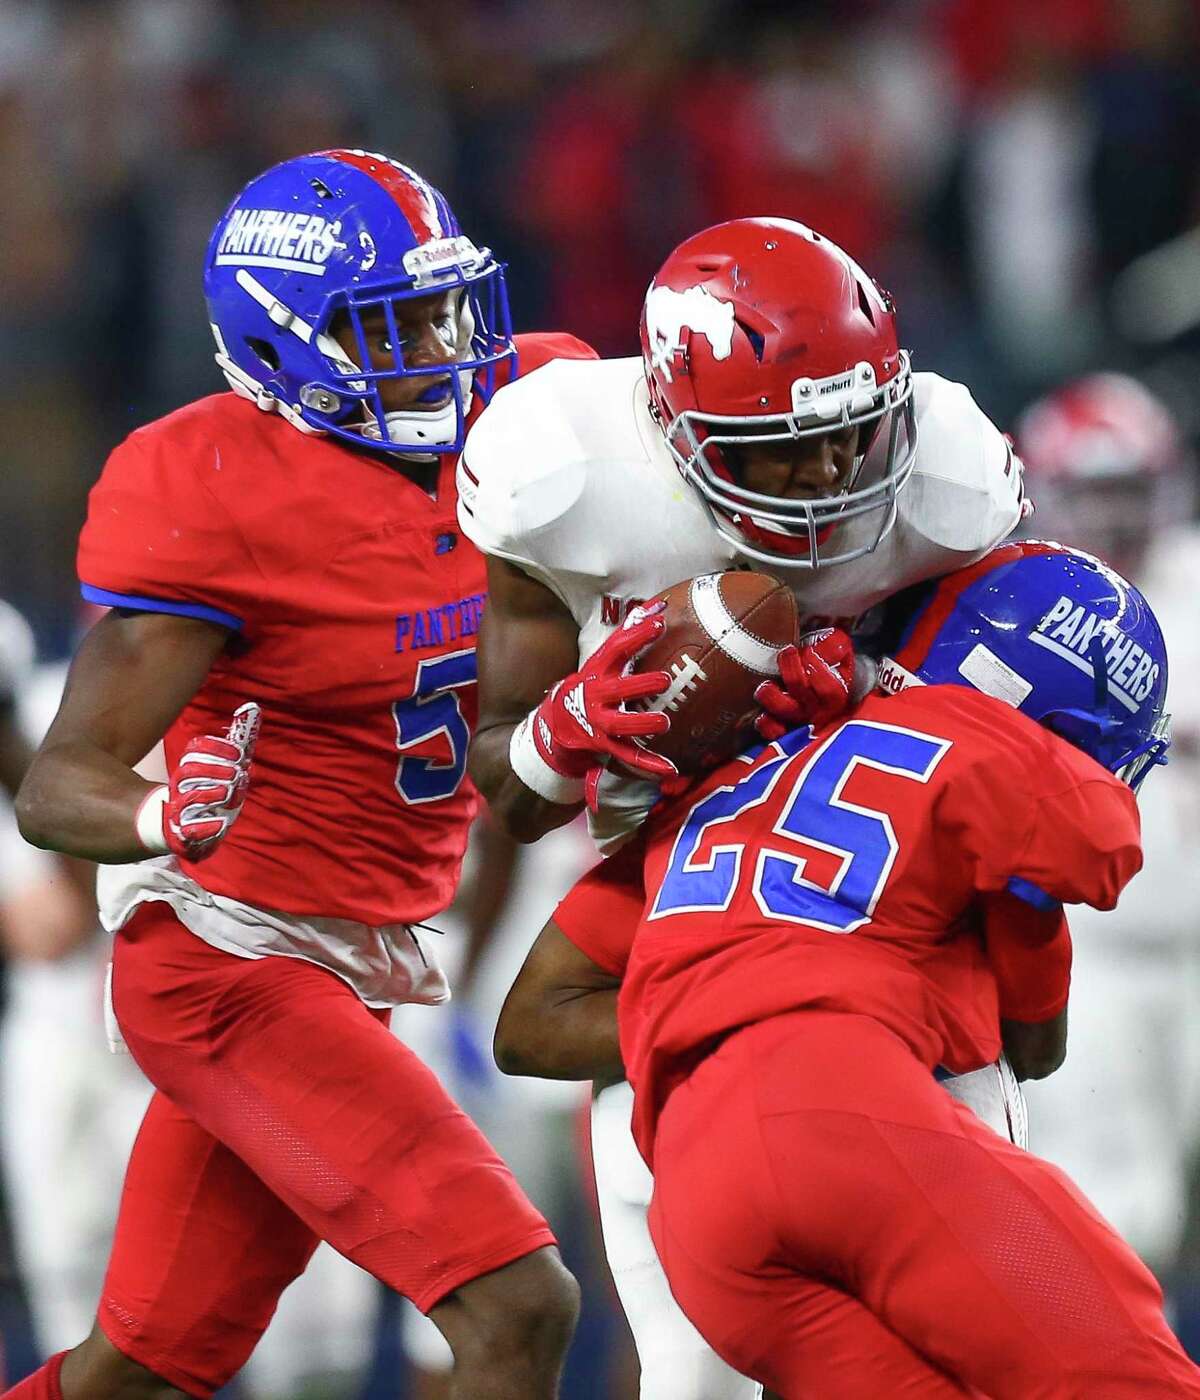 Football: Duncanville's Towels III looks to have immediate impact at Clear  Brook